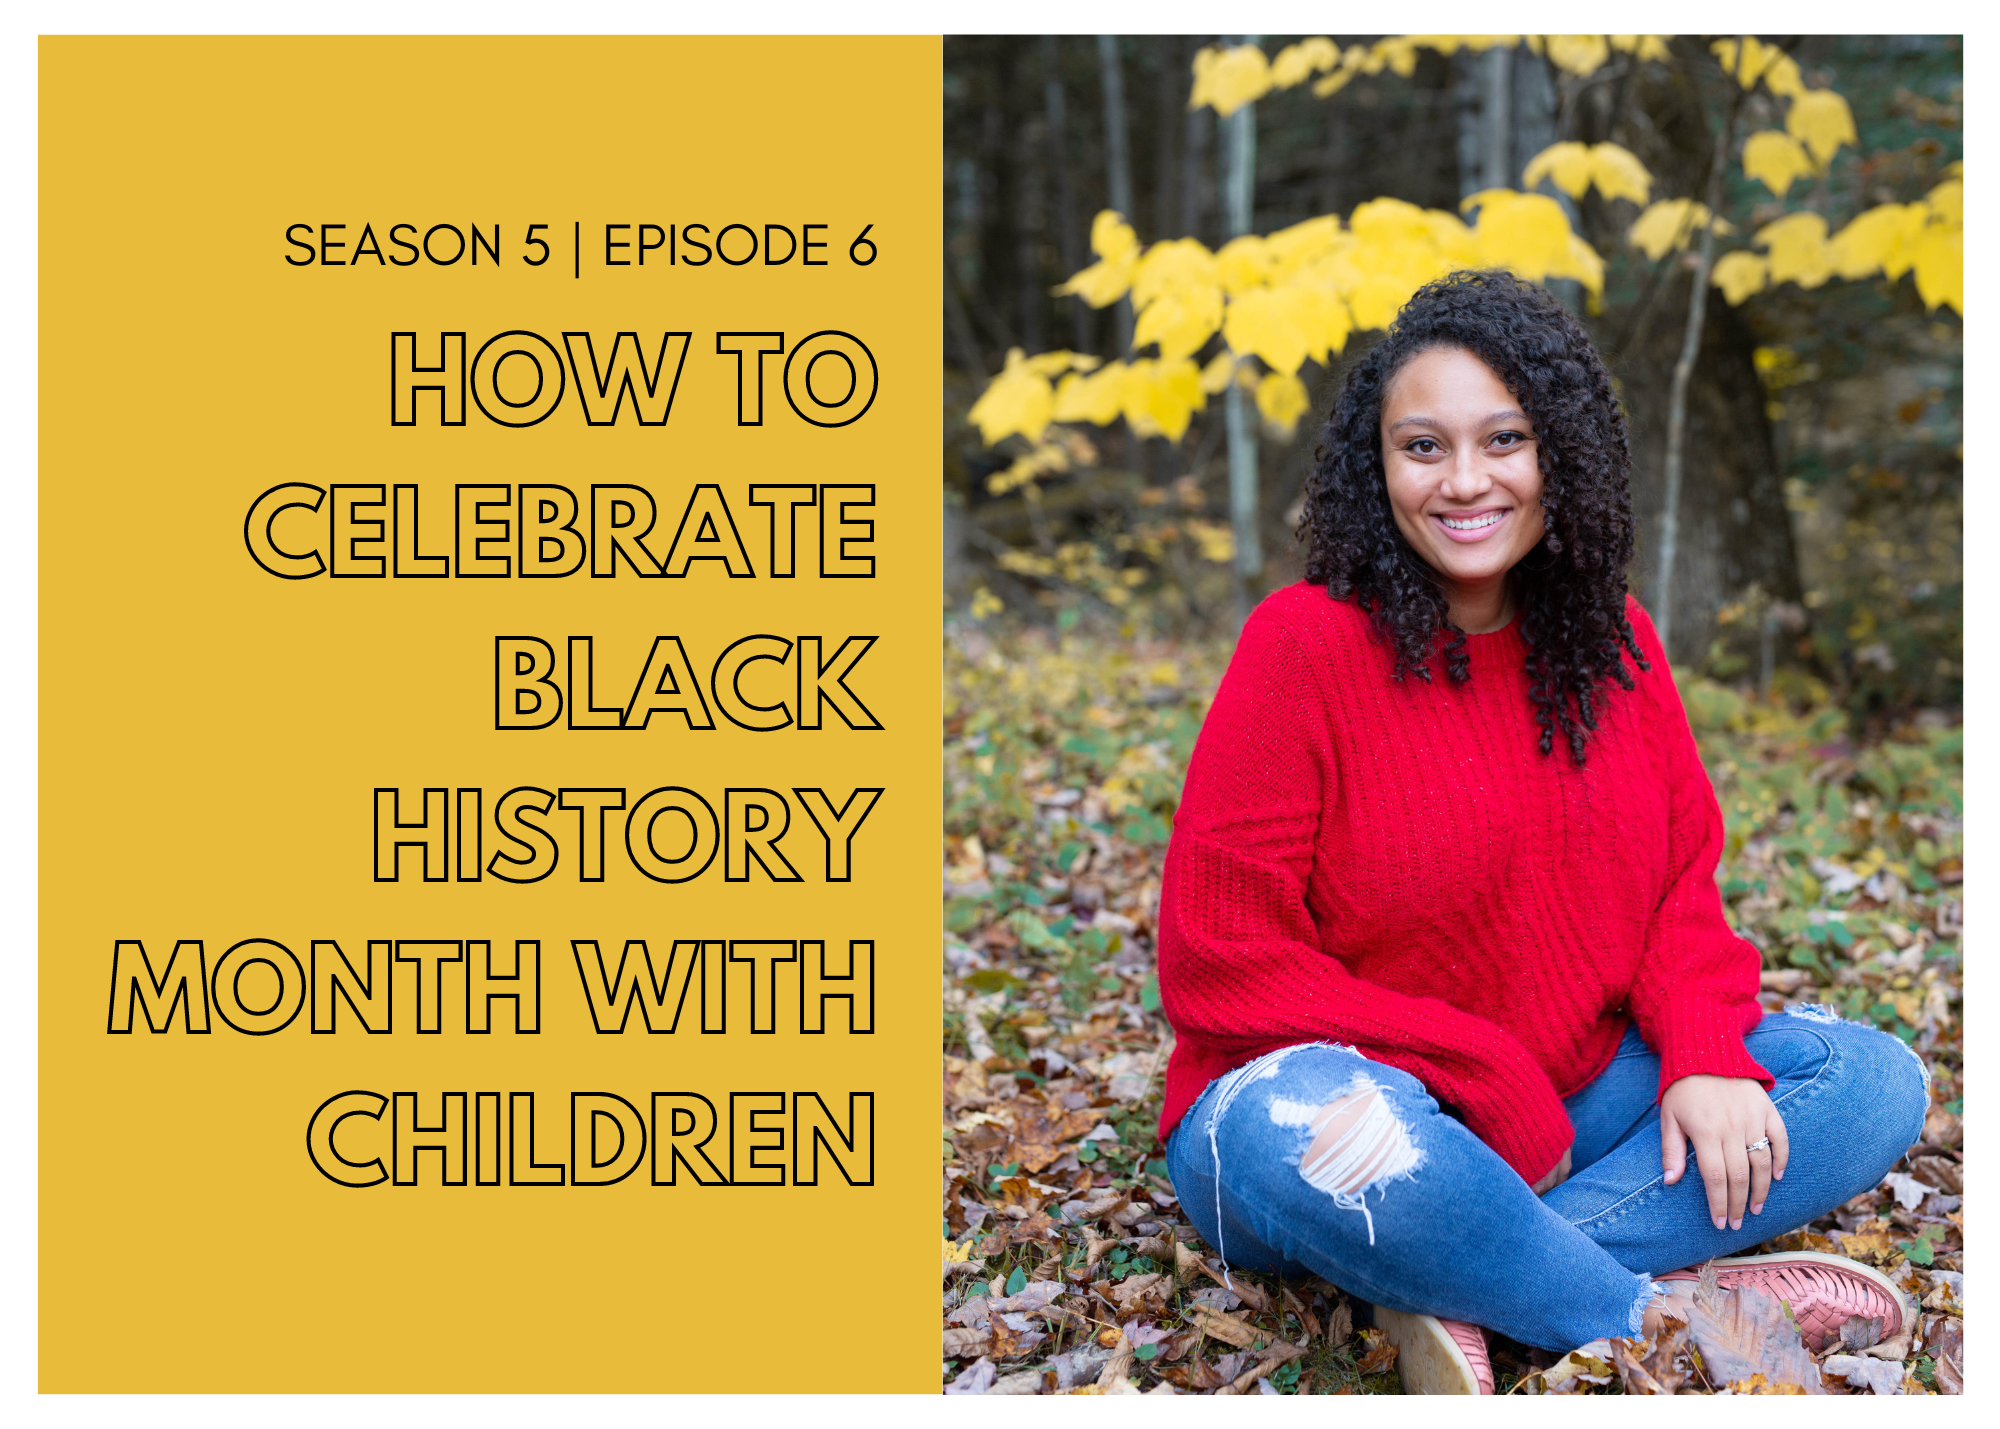 How to Celebrate Black History Month With Children